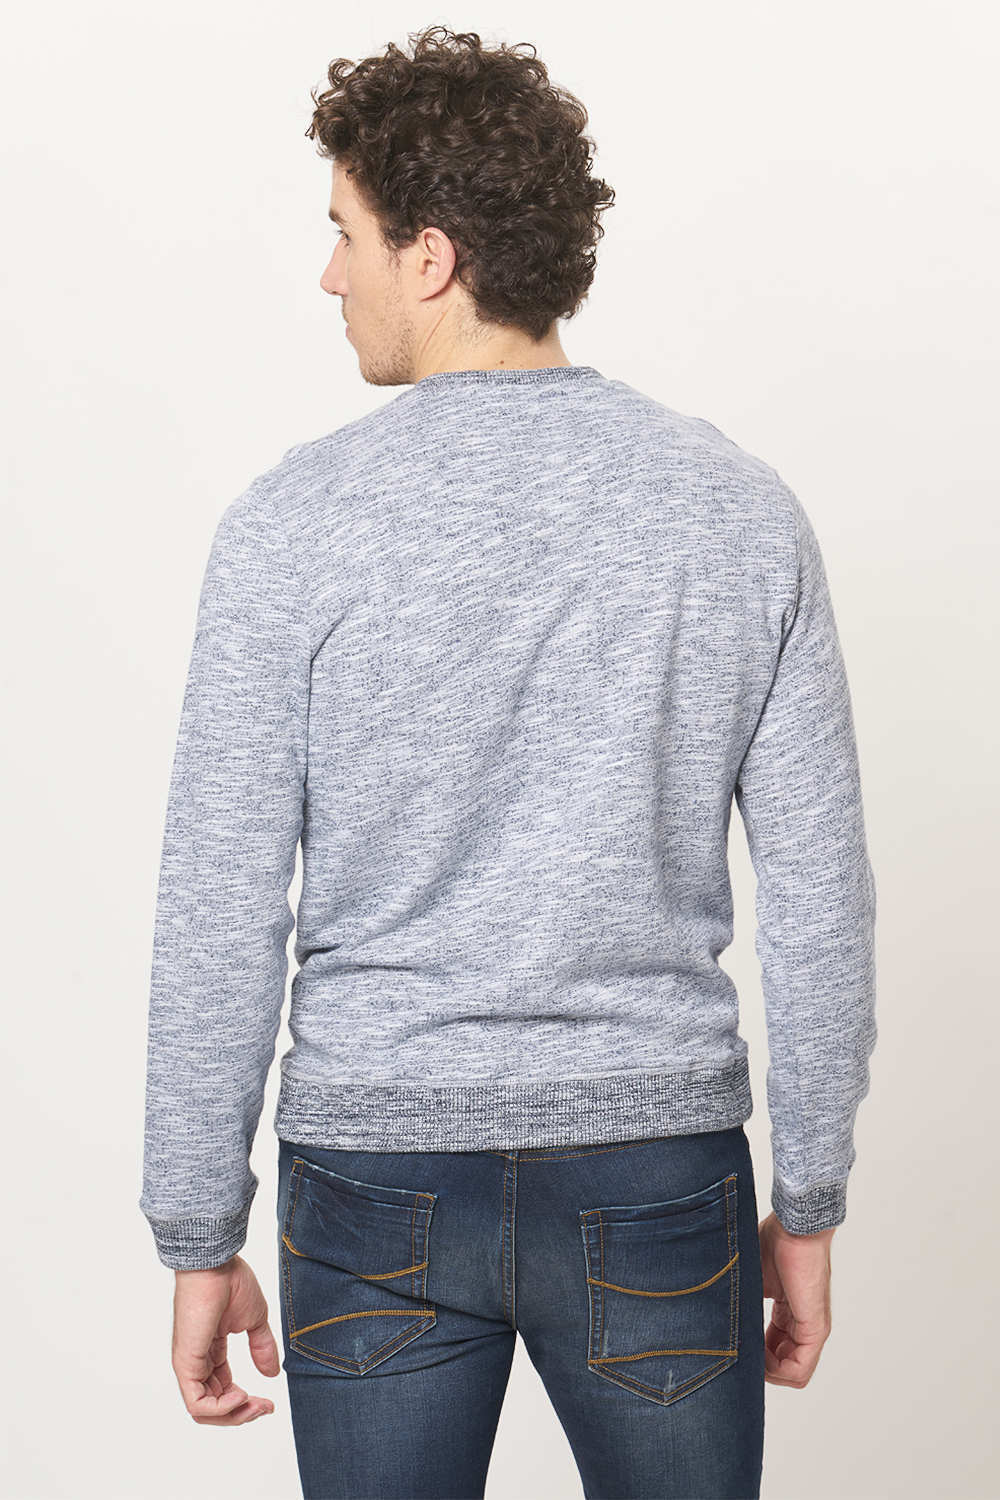 BASICS MUSCLE FIT HENLEY PULLOVER